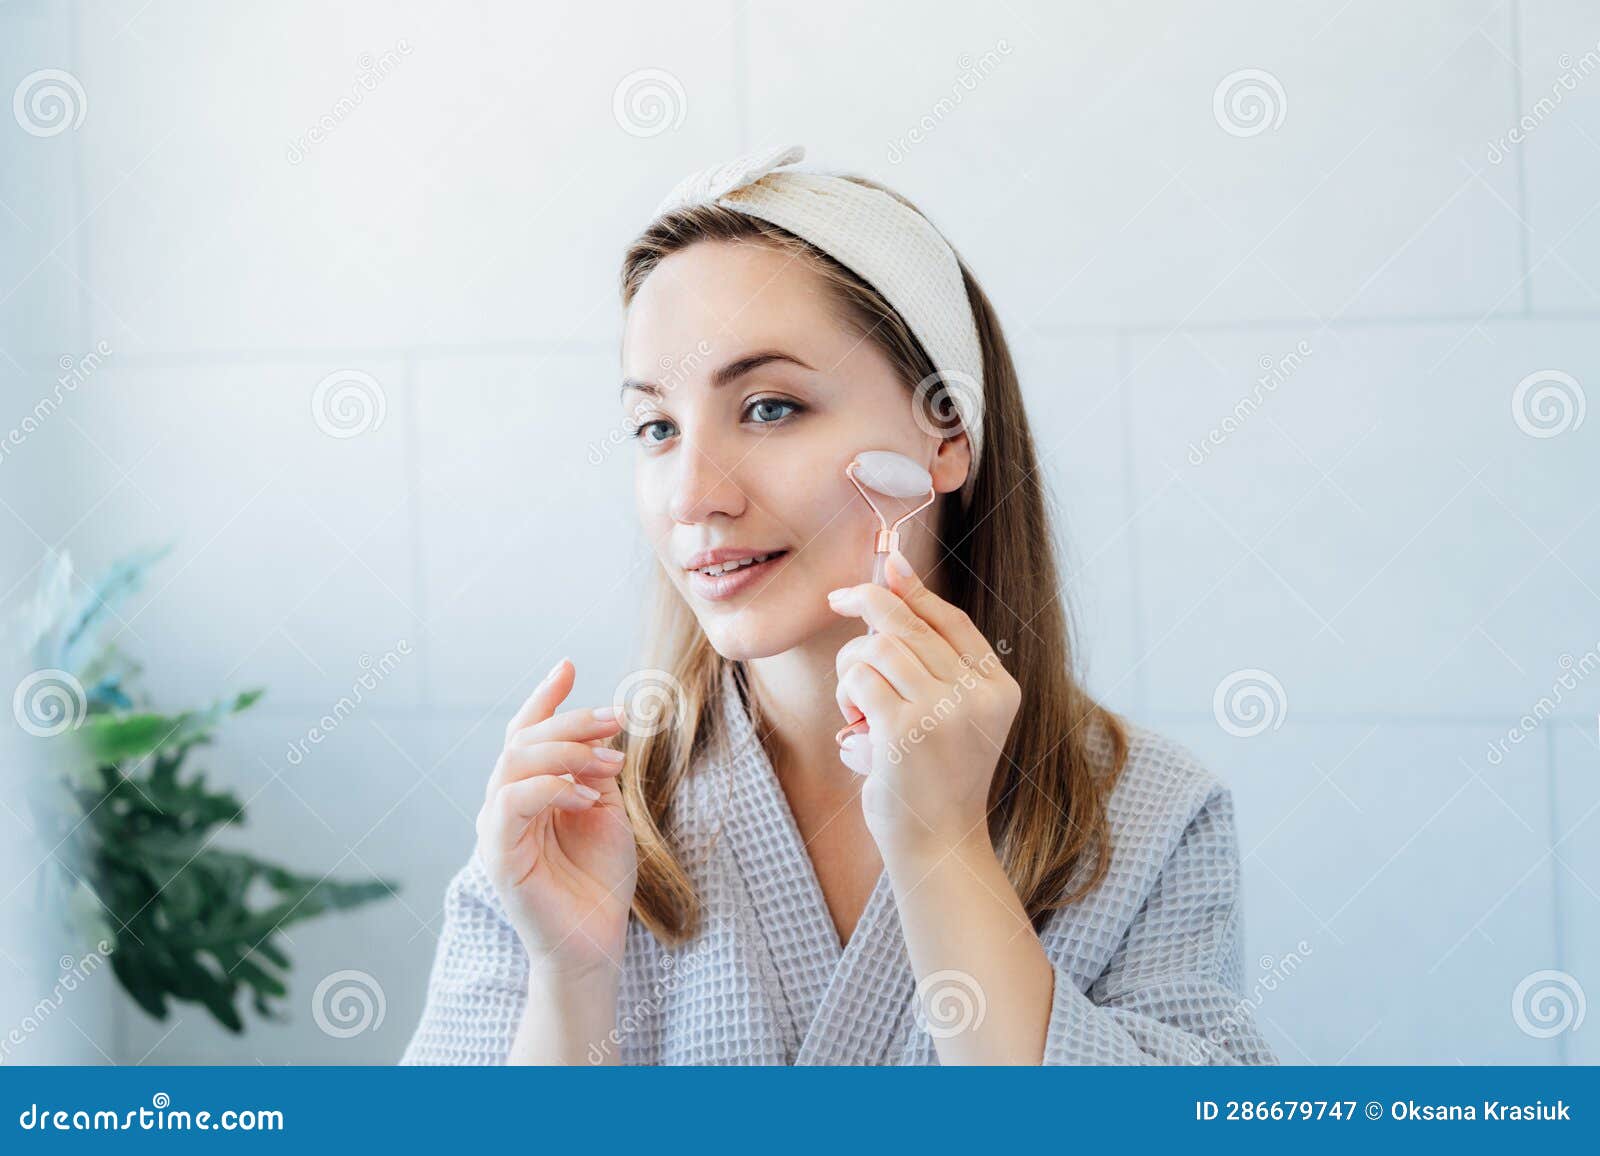 Young Woman In Bathrobe Looking In Mirror And Making Face Massage With Jade Roller In The